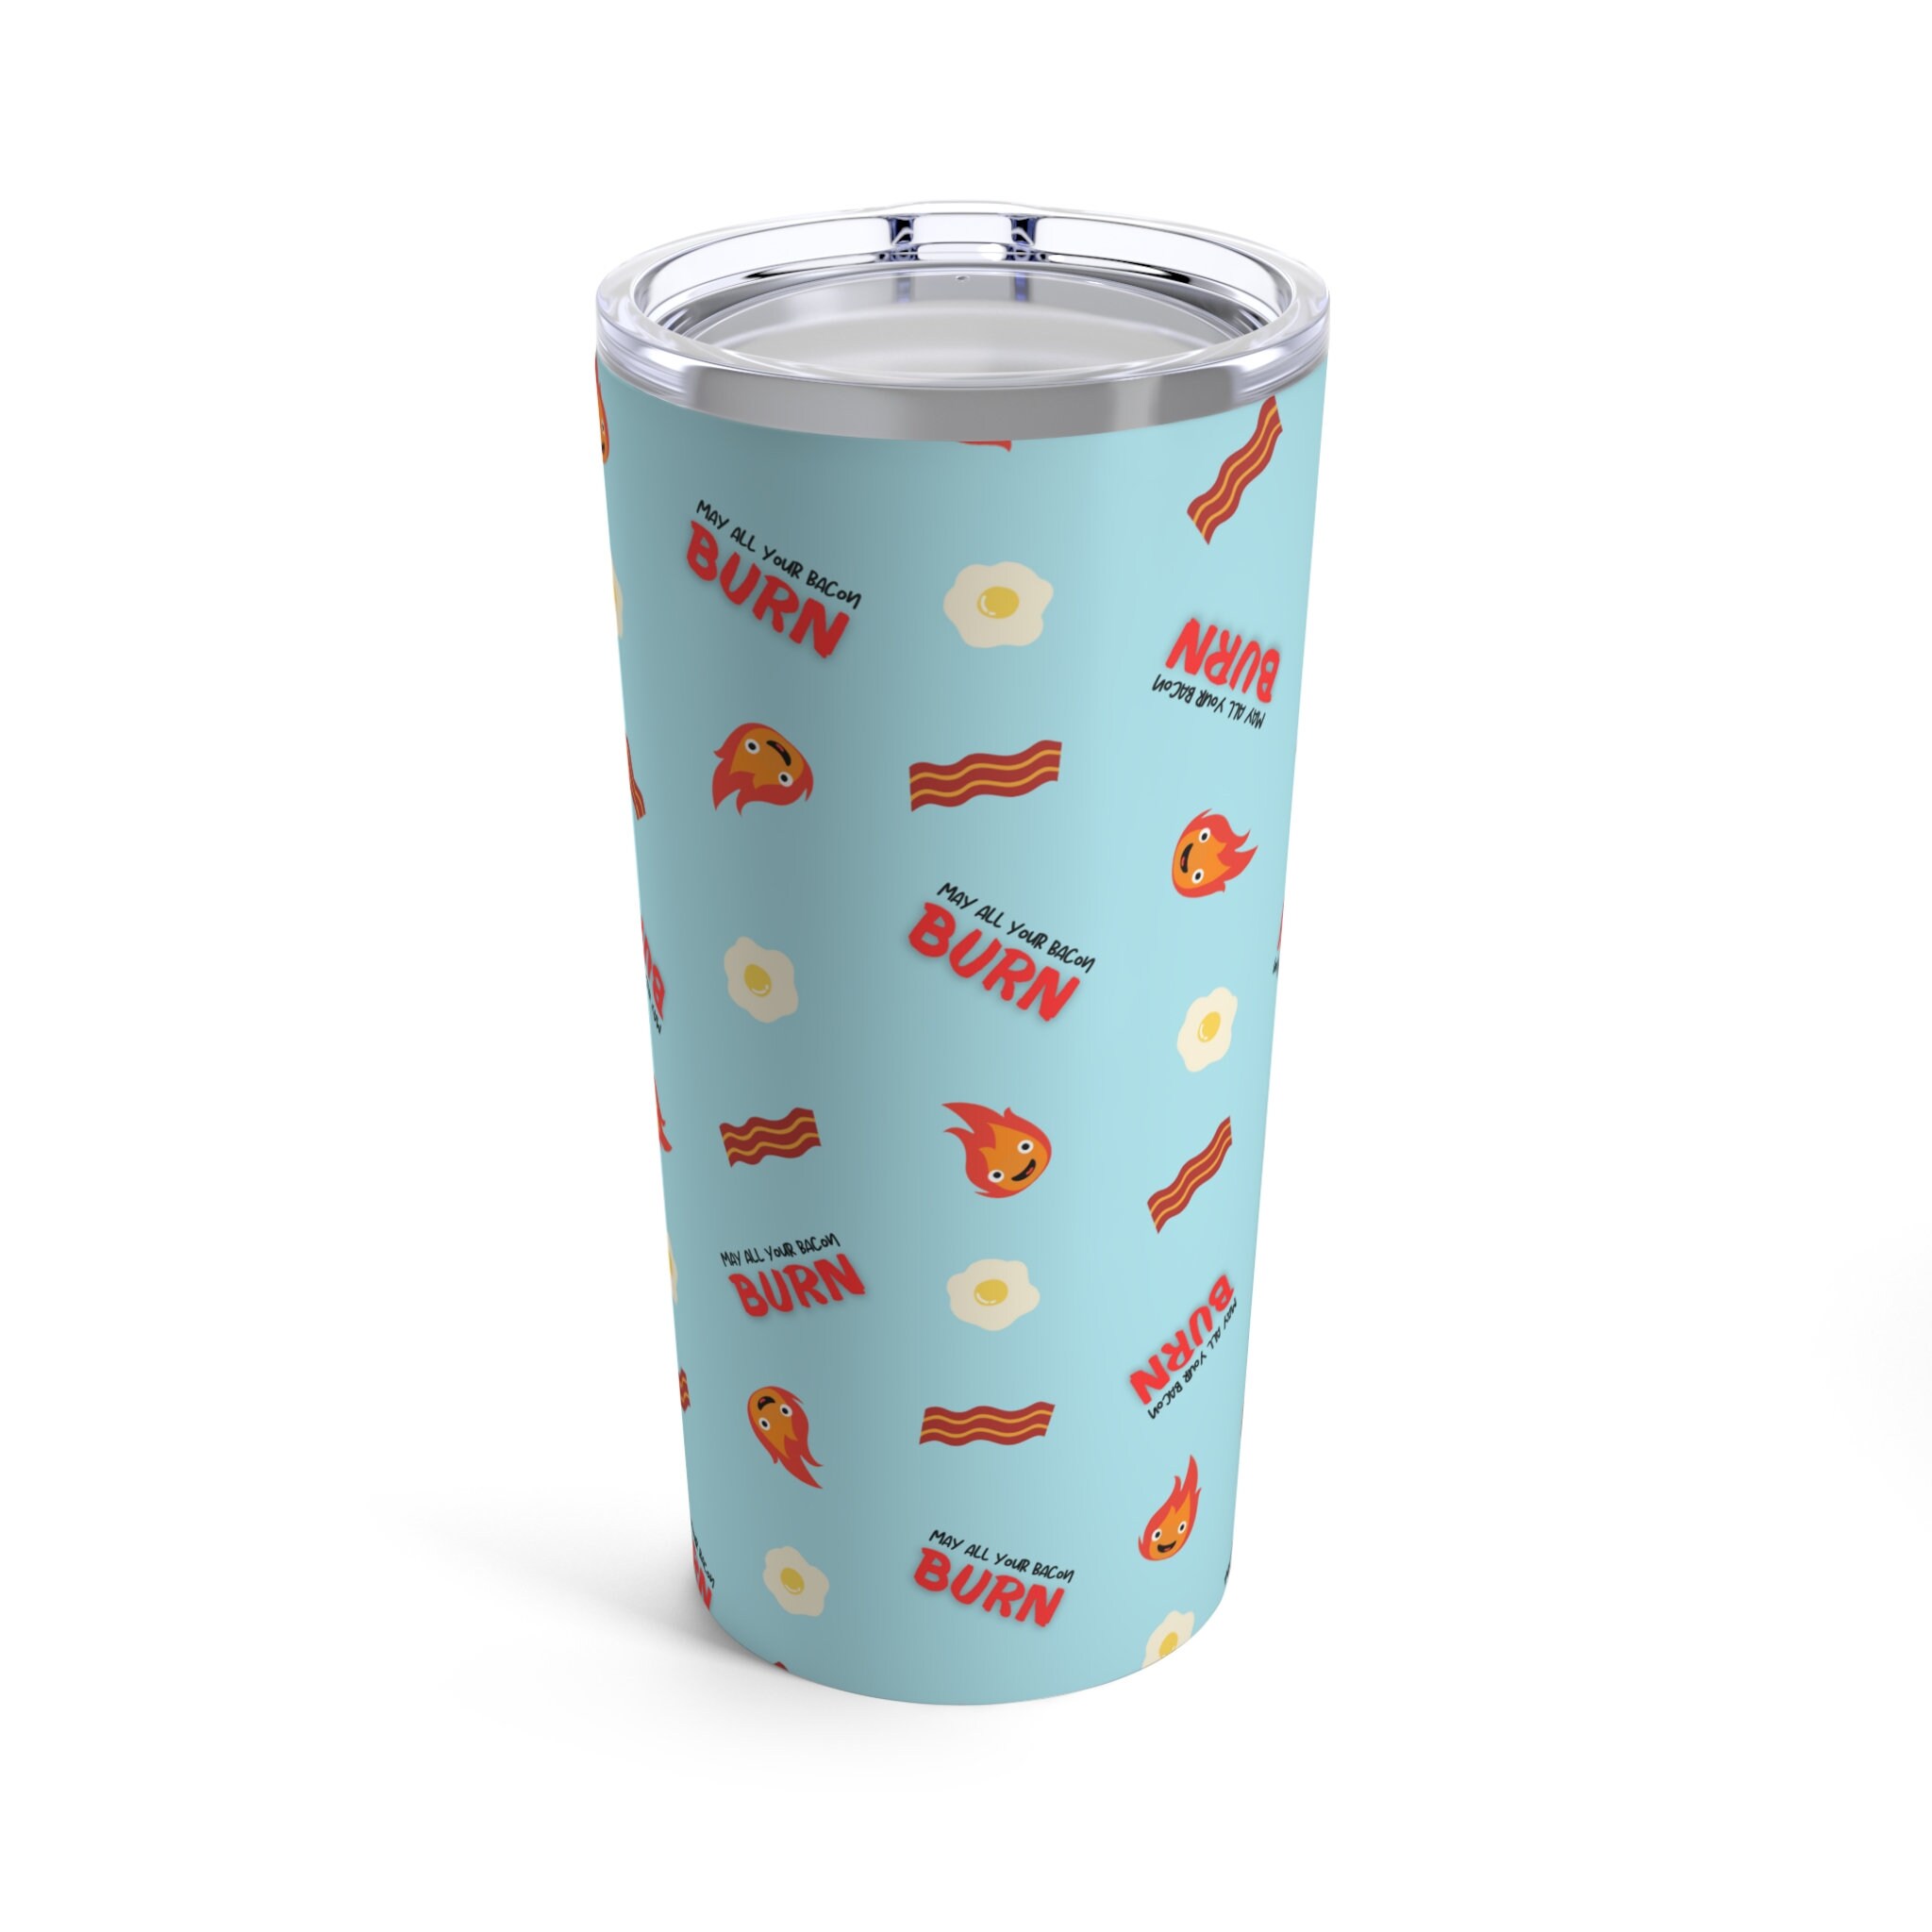 Calcifer, Turnip Head and Heen's Frosted 16 oz Glass Tumbler